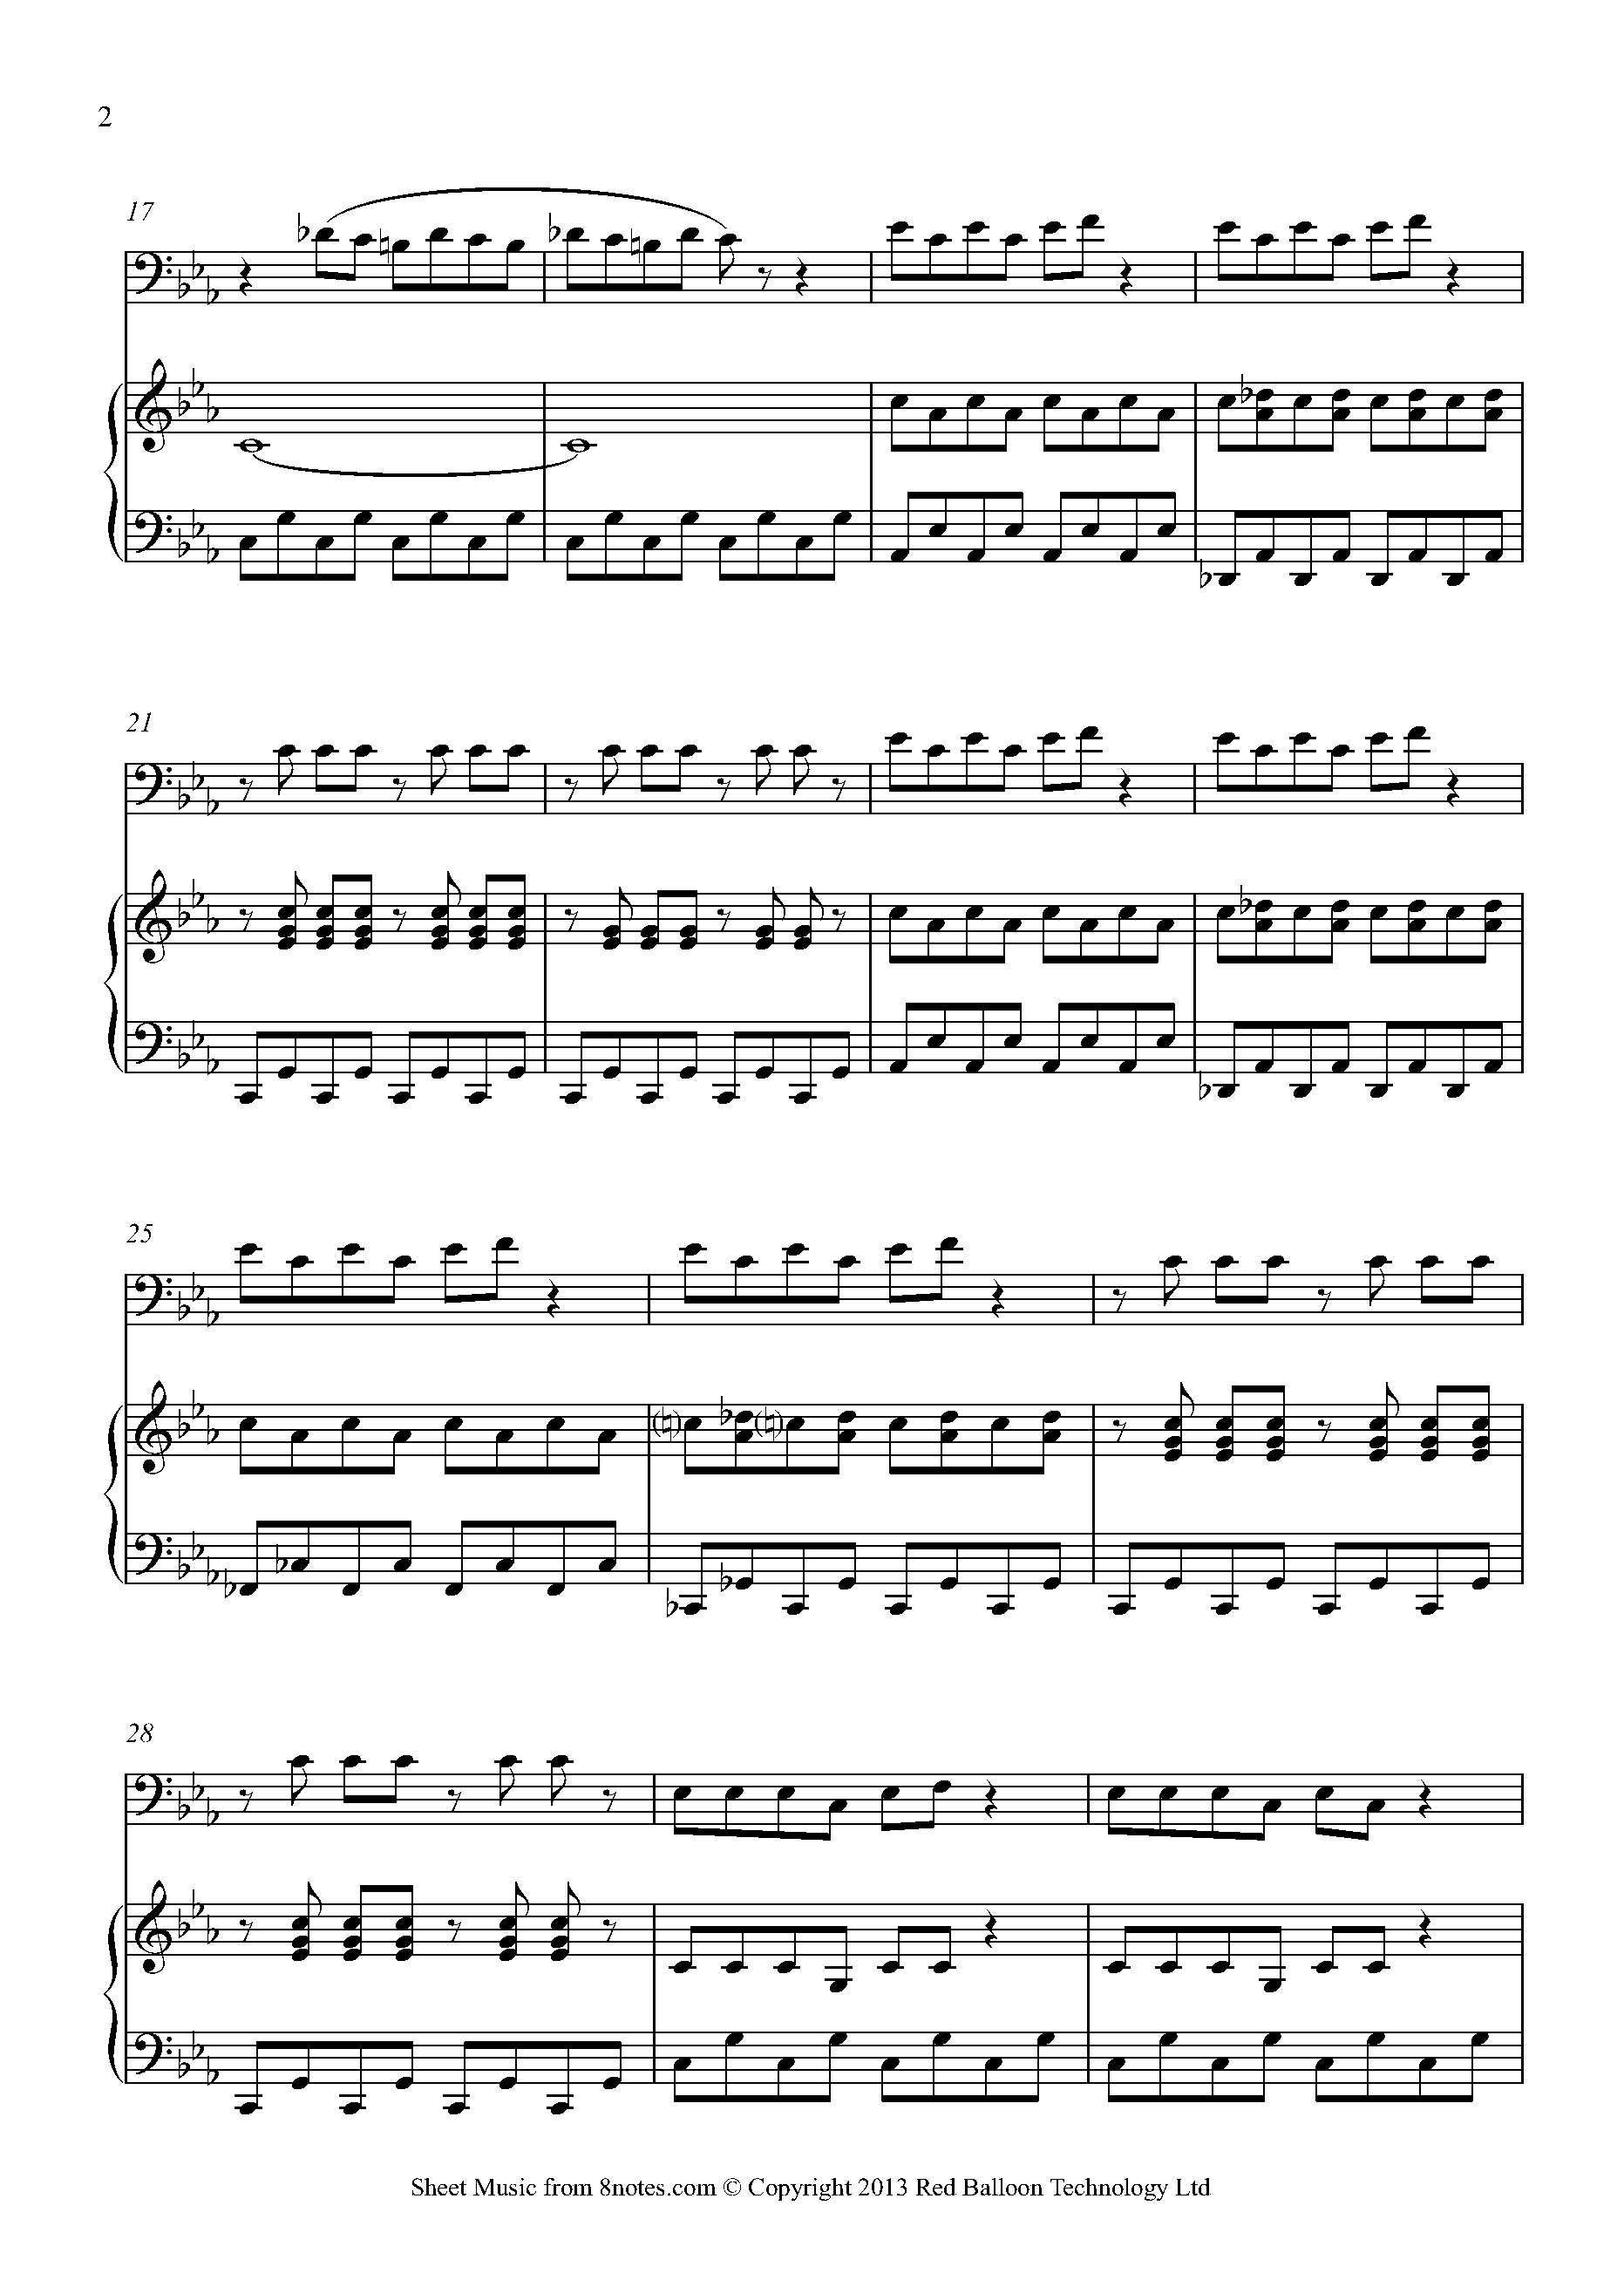 David Bruce - Despicable Rush Sheet music for Trombone - 8notes.com